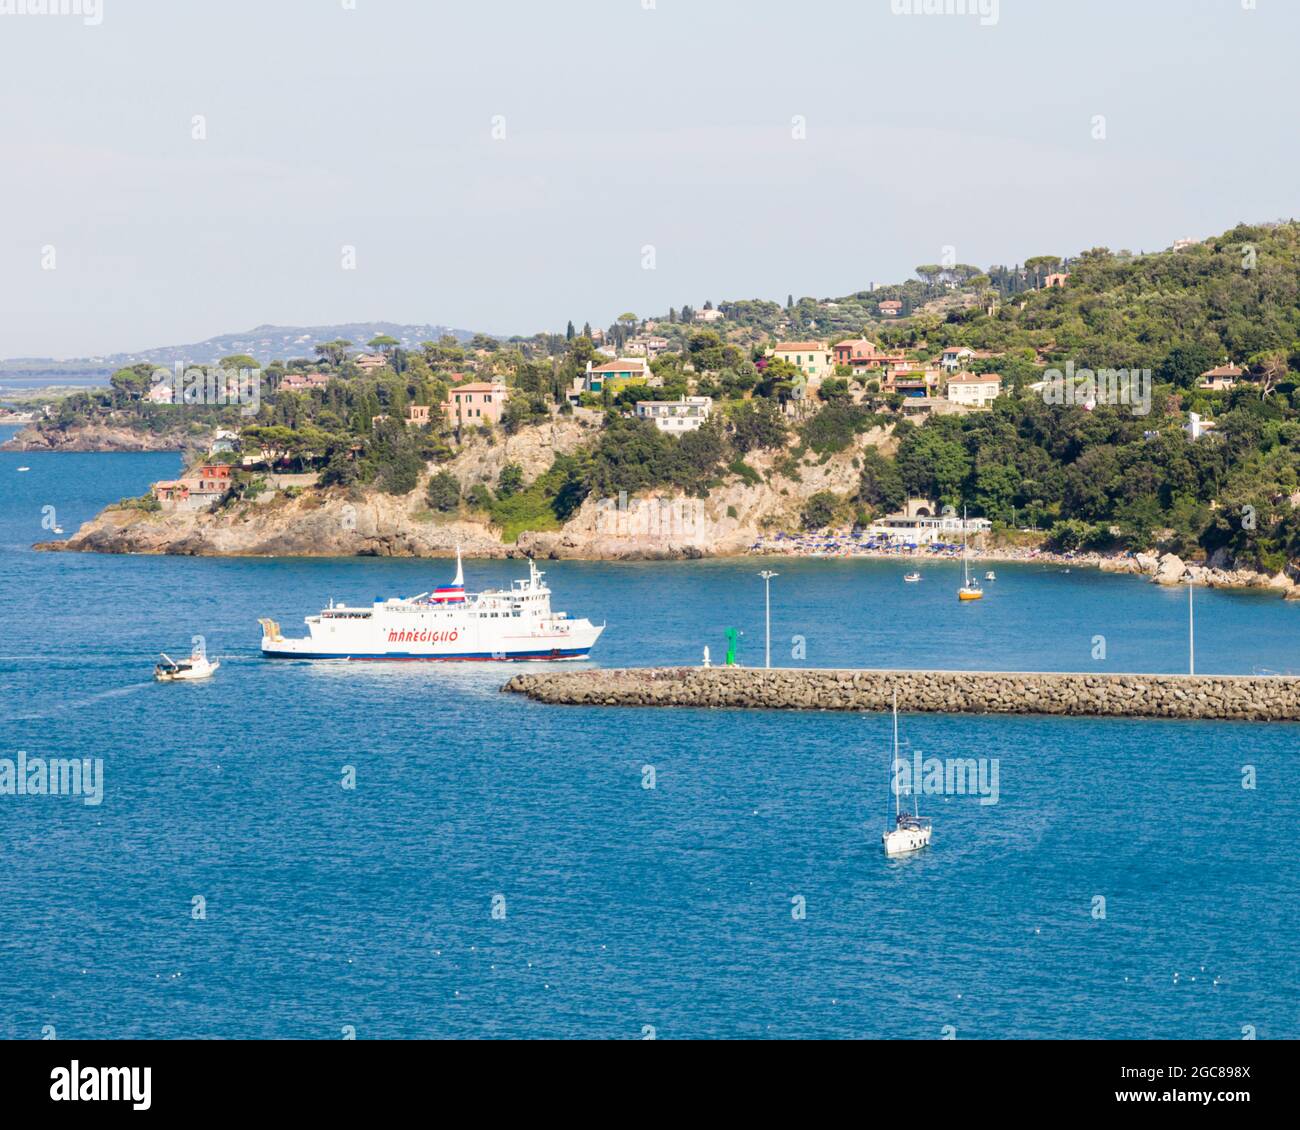 A ferry pulls into the ferry port of Porto Santo Stefano in Tuscany, Italy. Stock Photo